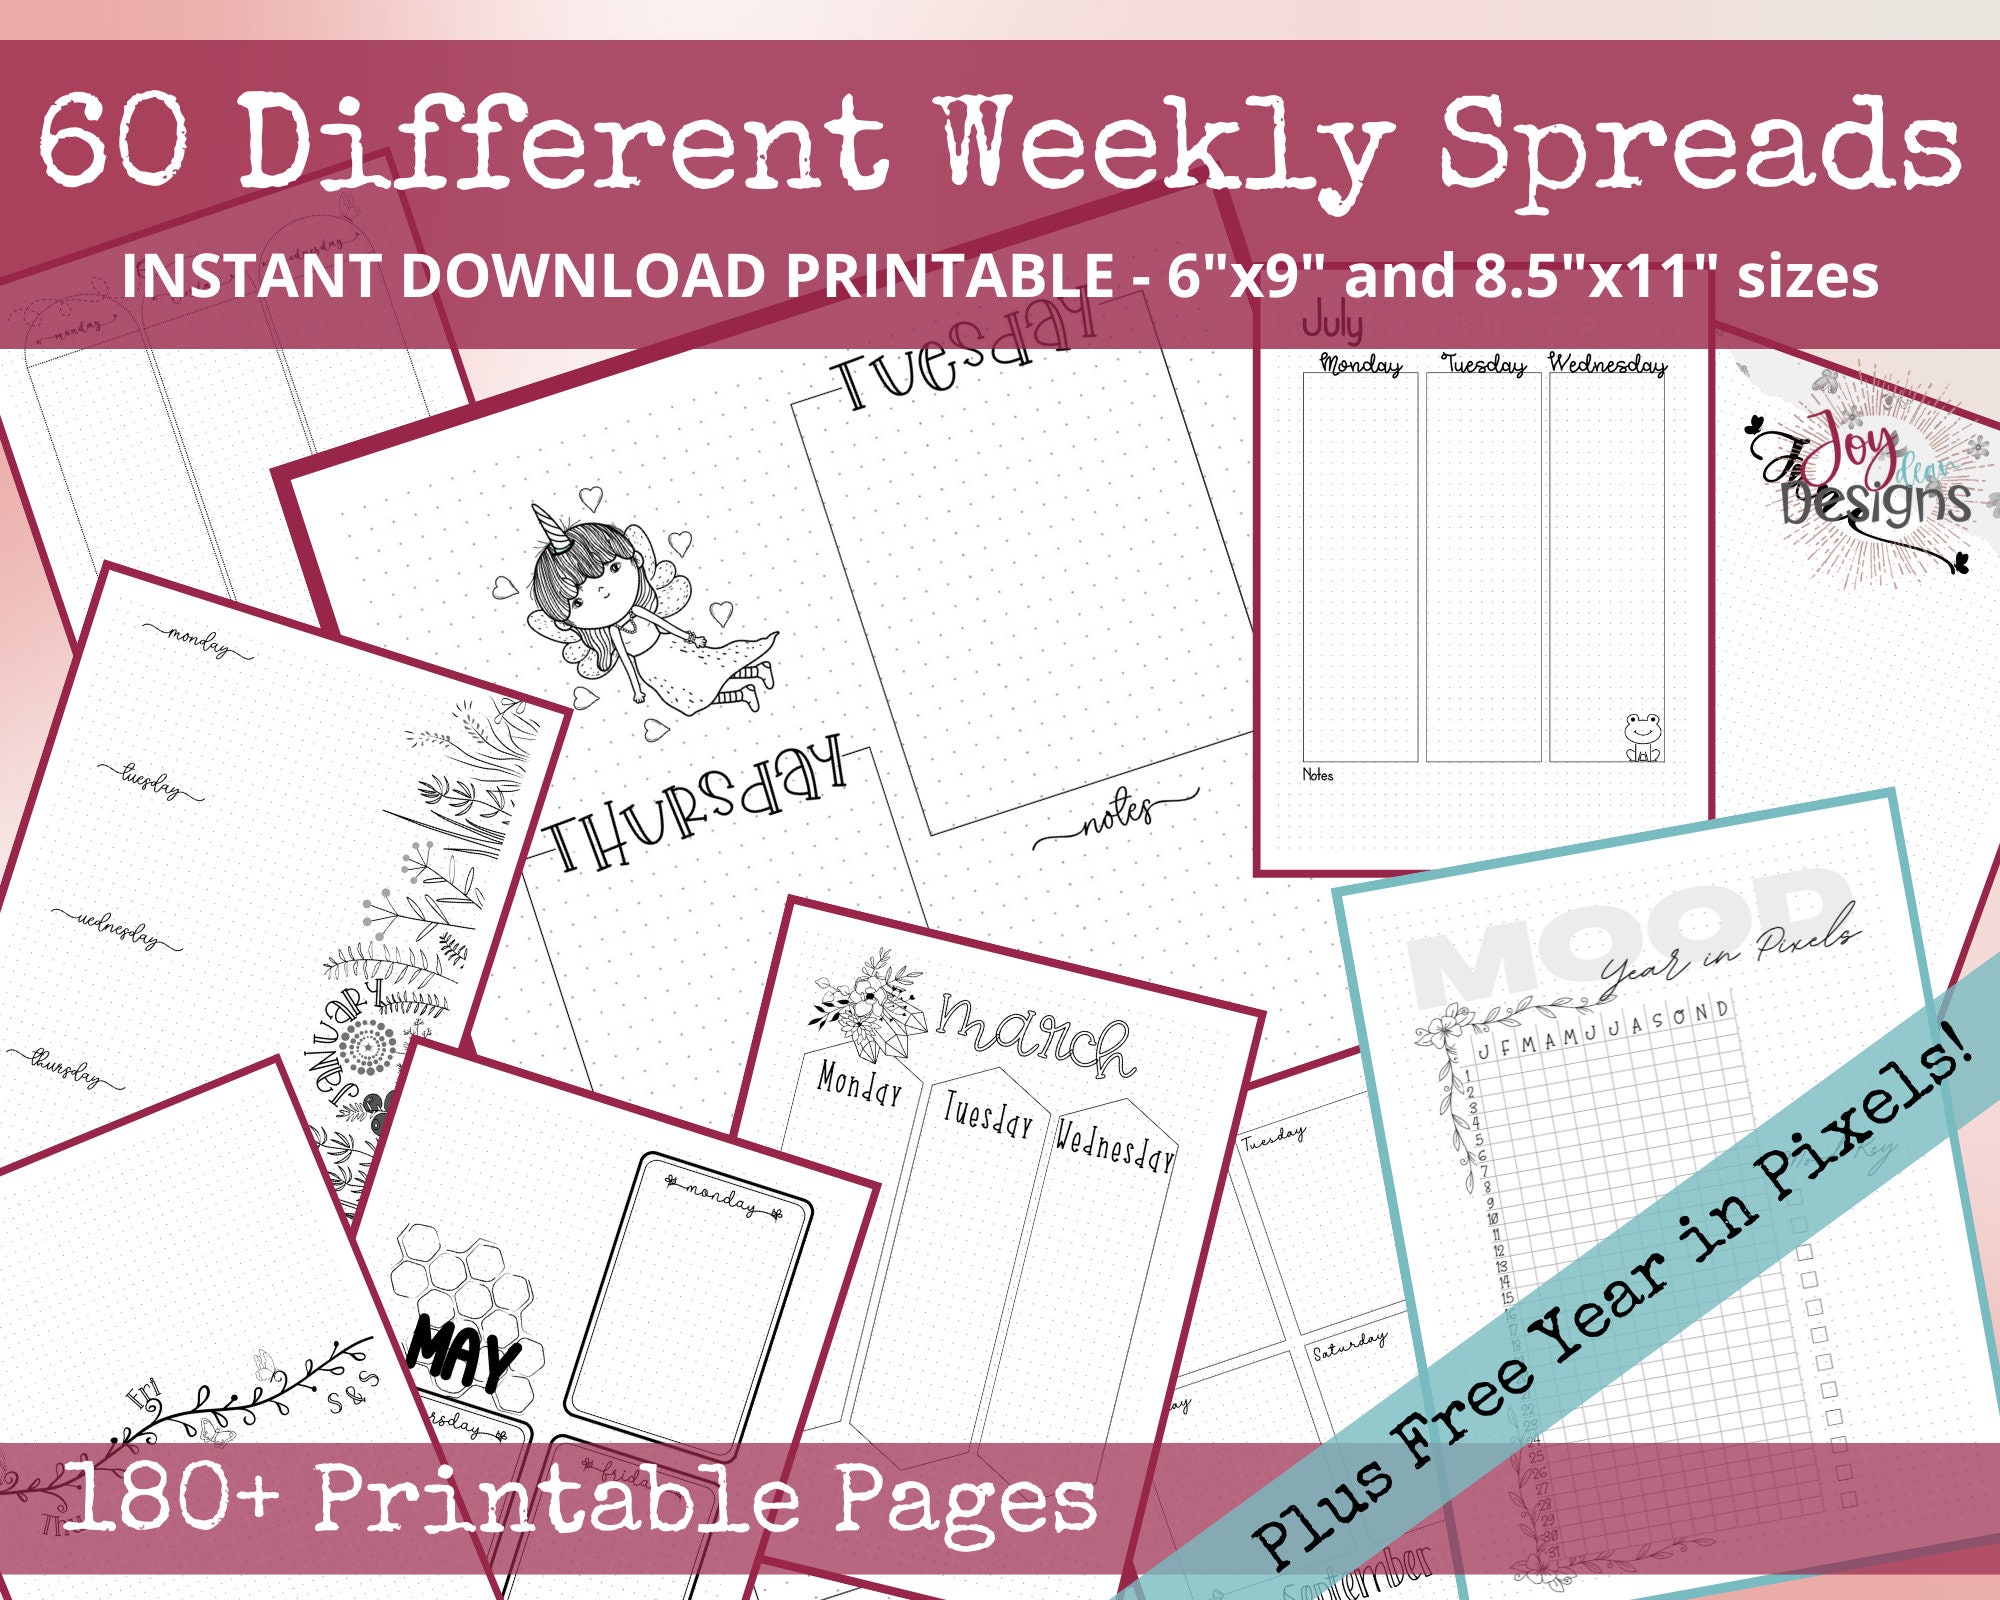 PreMade Bullet Journal Planner Pages, Instant Download Printable Planner, Weekly Bujo Inserts Template PDF 2 Sizes